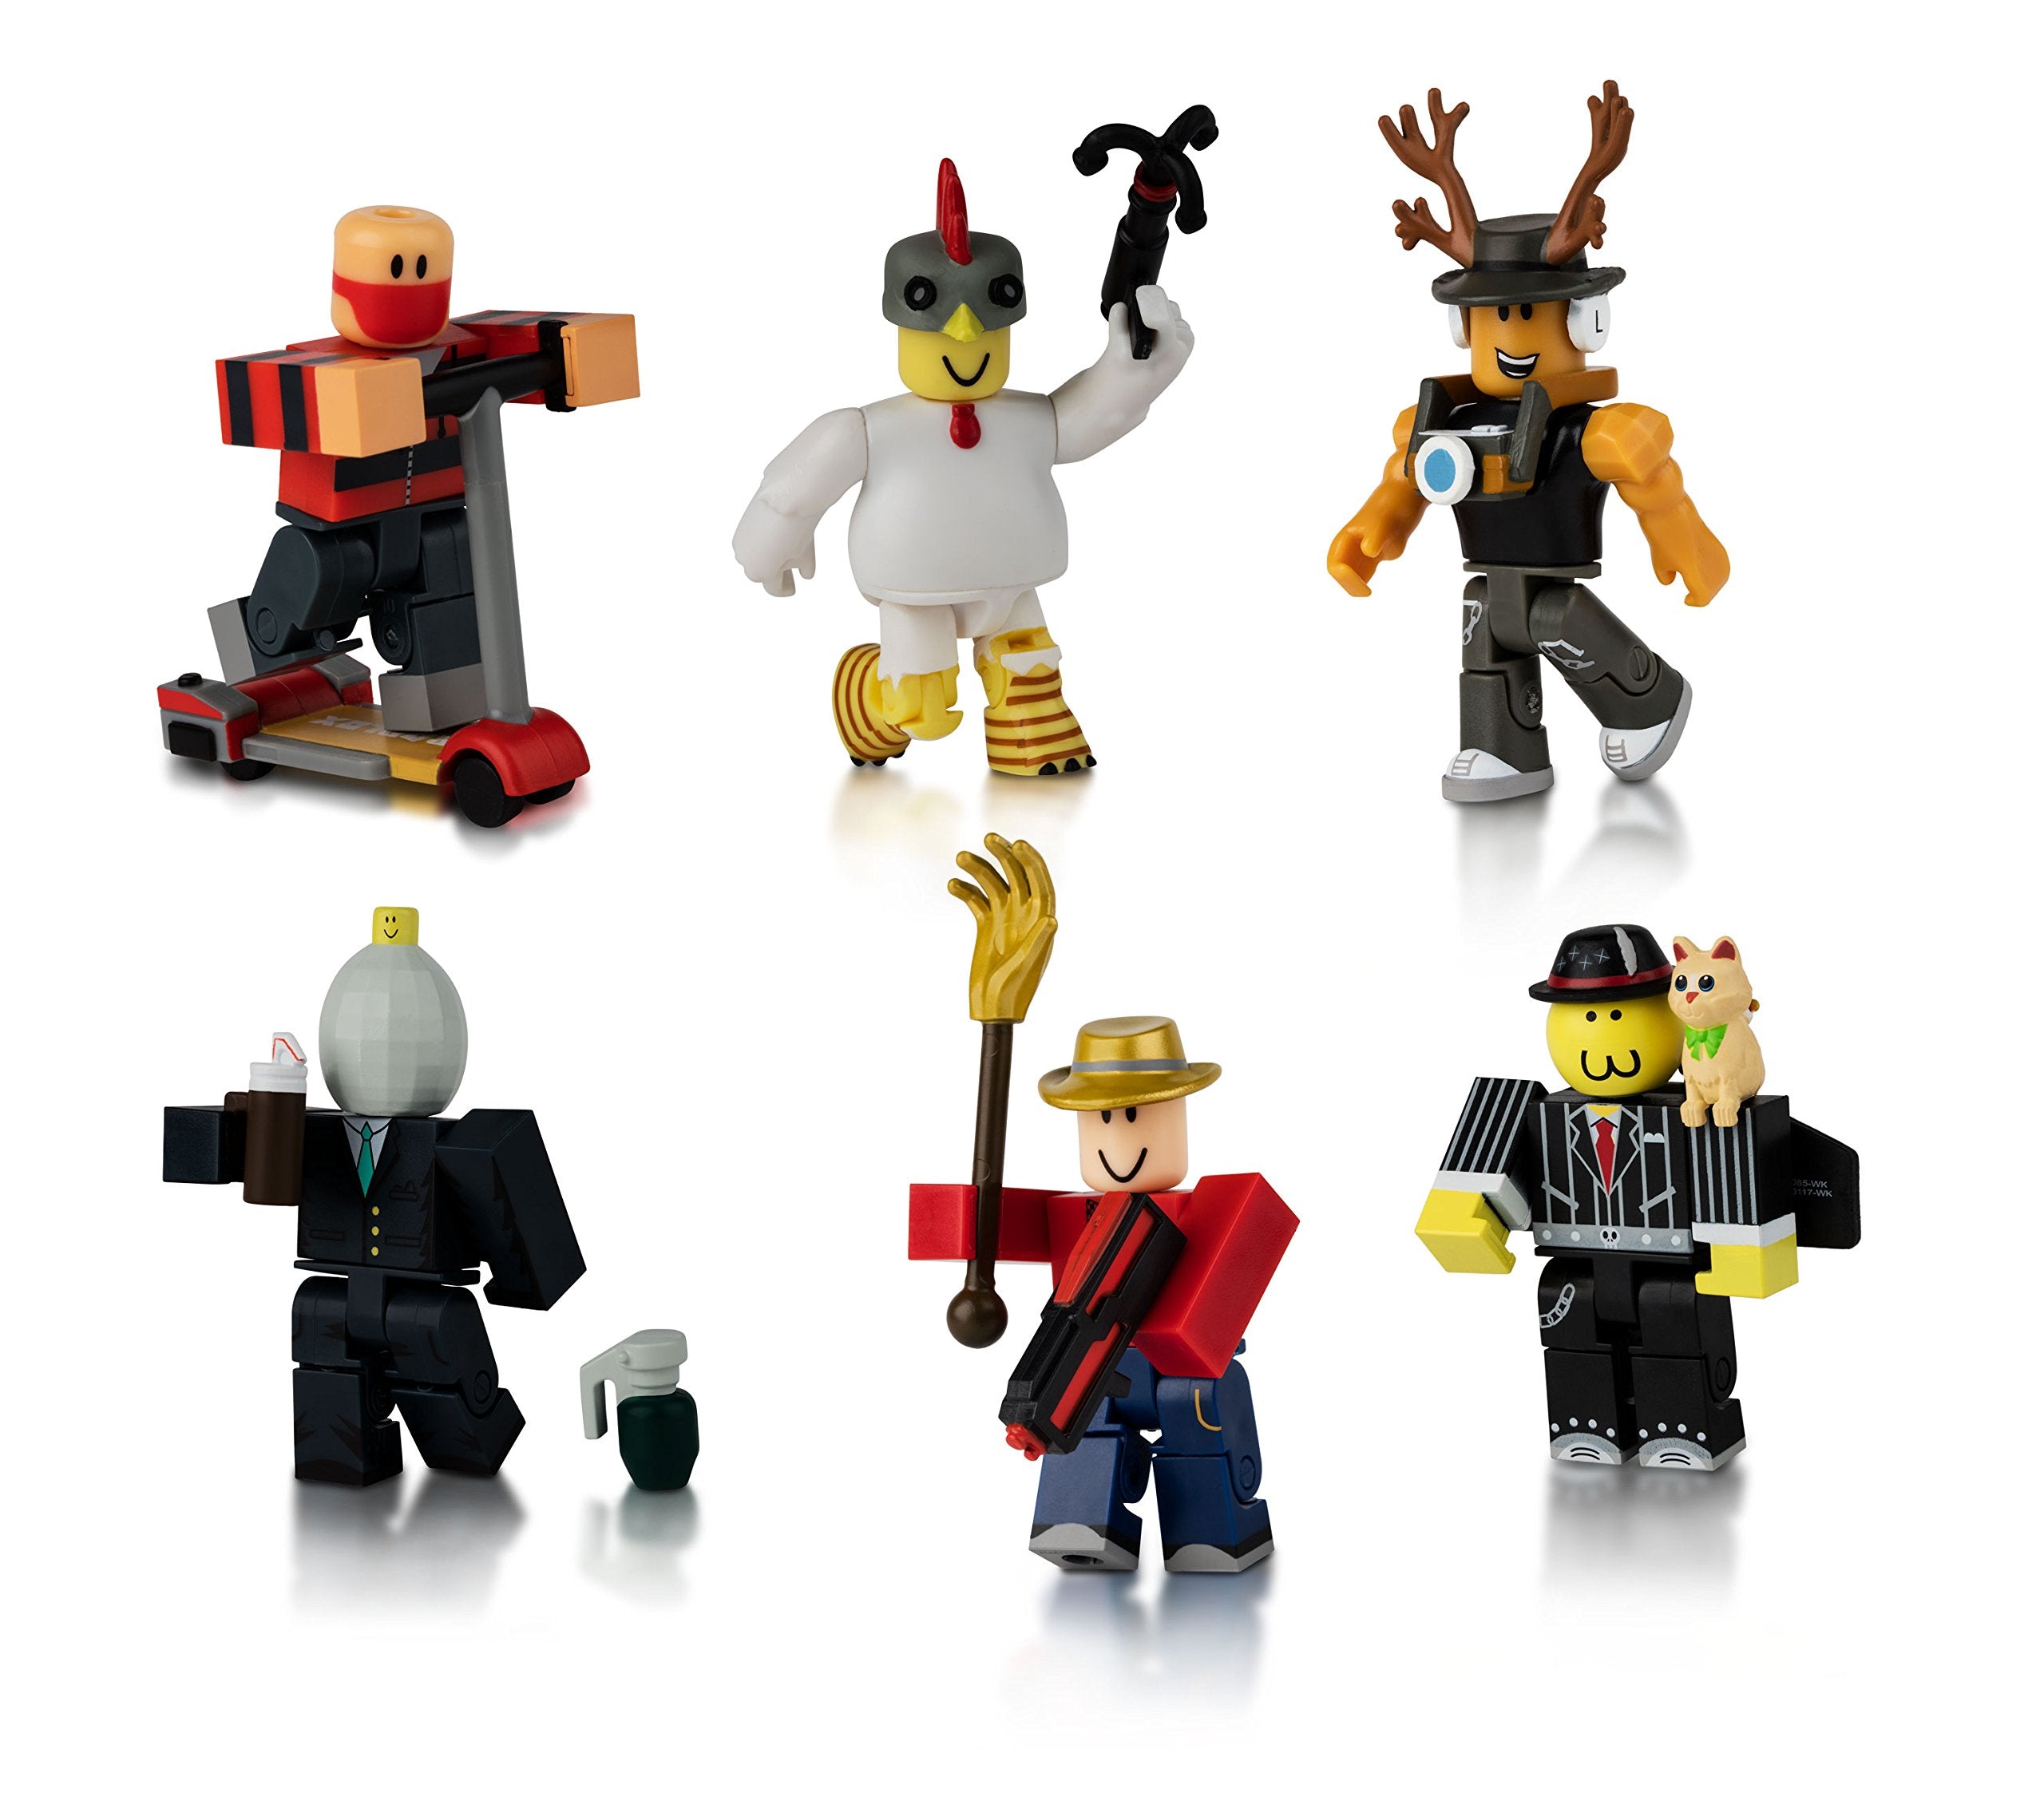 Other Toys Roblox Masters Six Figure Pack Was Listed For R958 95 On 13 Mar At 21 22 By Papertown Africa In Outside South Africa Id 396604095 - roblox homegarden south africa buy roblox homegarden online wantitall